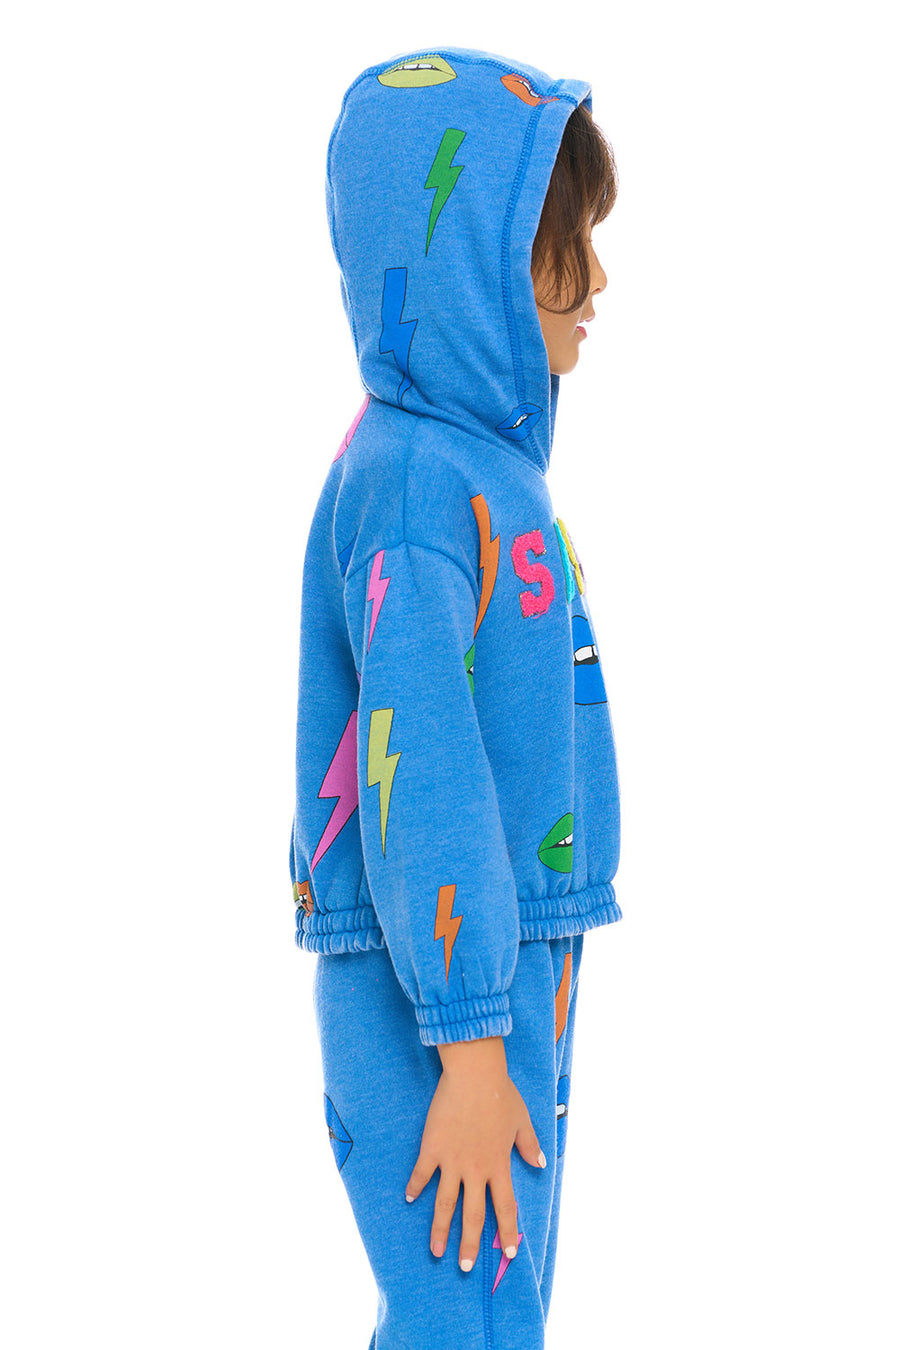 Lips & Bolts Hoodie GIRLS chaserbrand